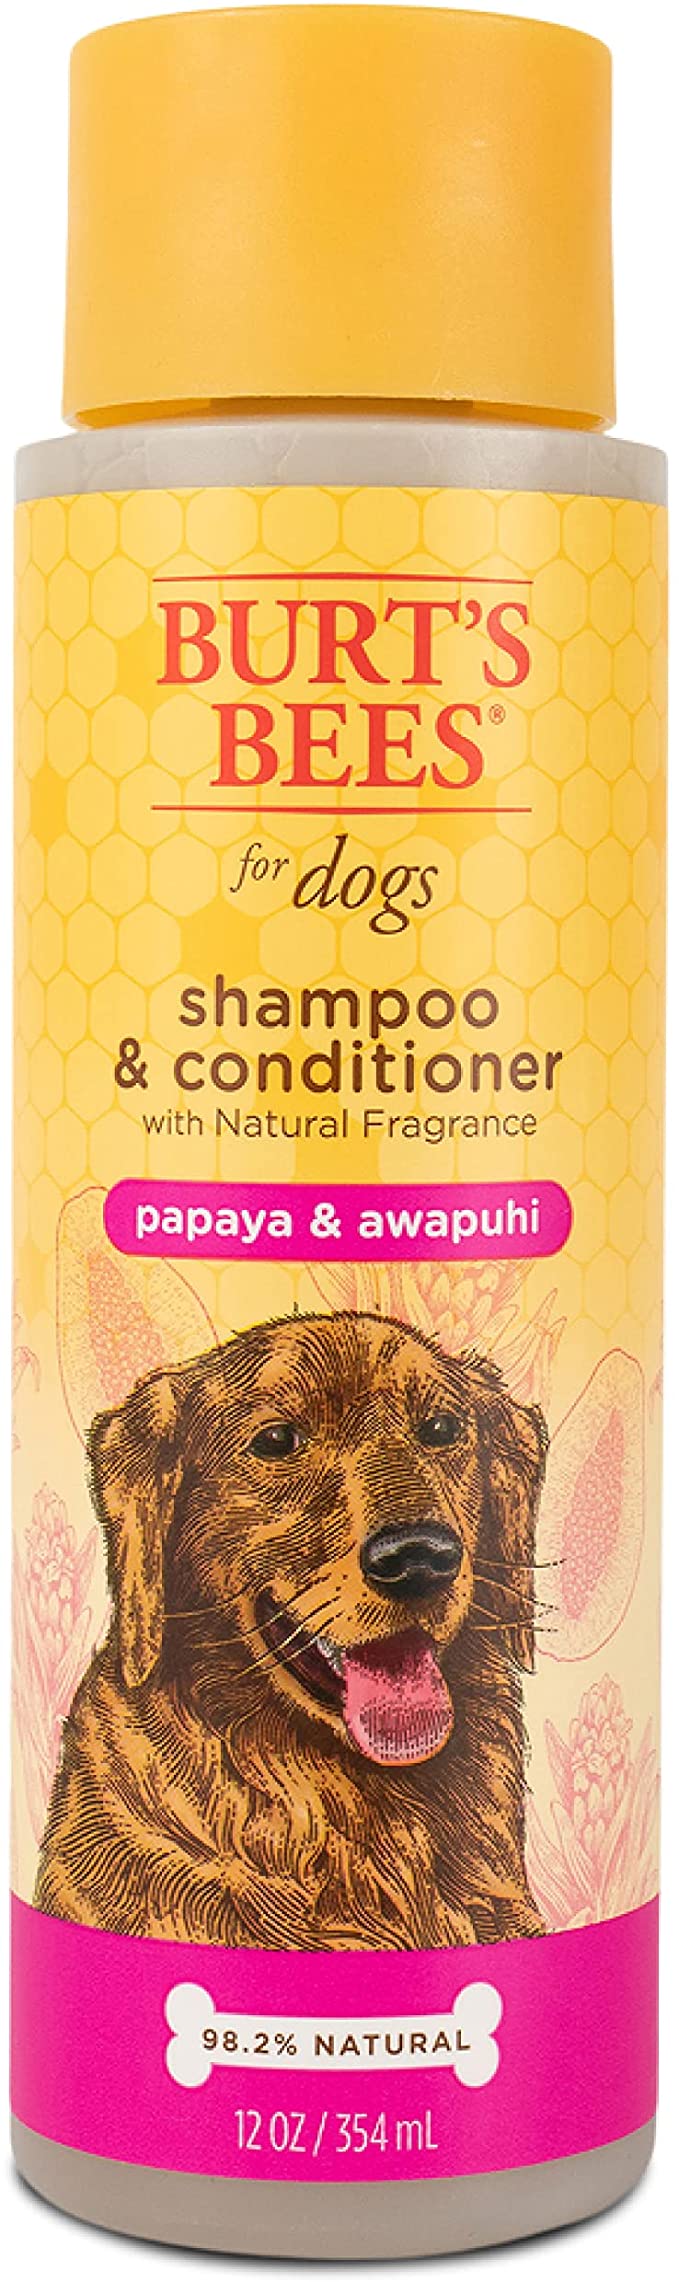 Burt's Bees for Dogs Shampoo & Conditioner with Papaya & Awapuhi Fragrance | 2-in-1 Dog Shampoo & Conditioner - Sulfate & Paraben Free, pH Balanced for Dogs - Made in USA, 12 Oz